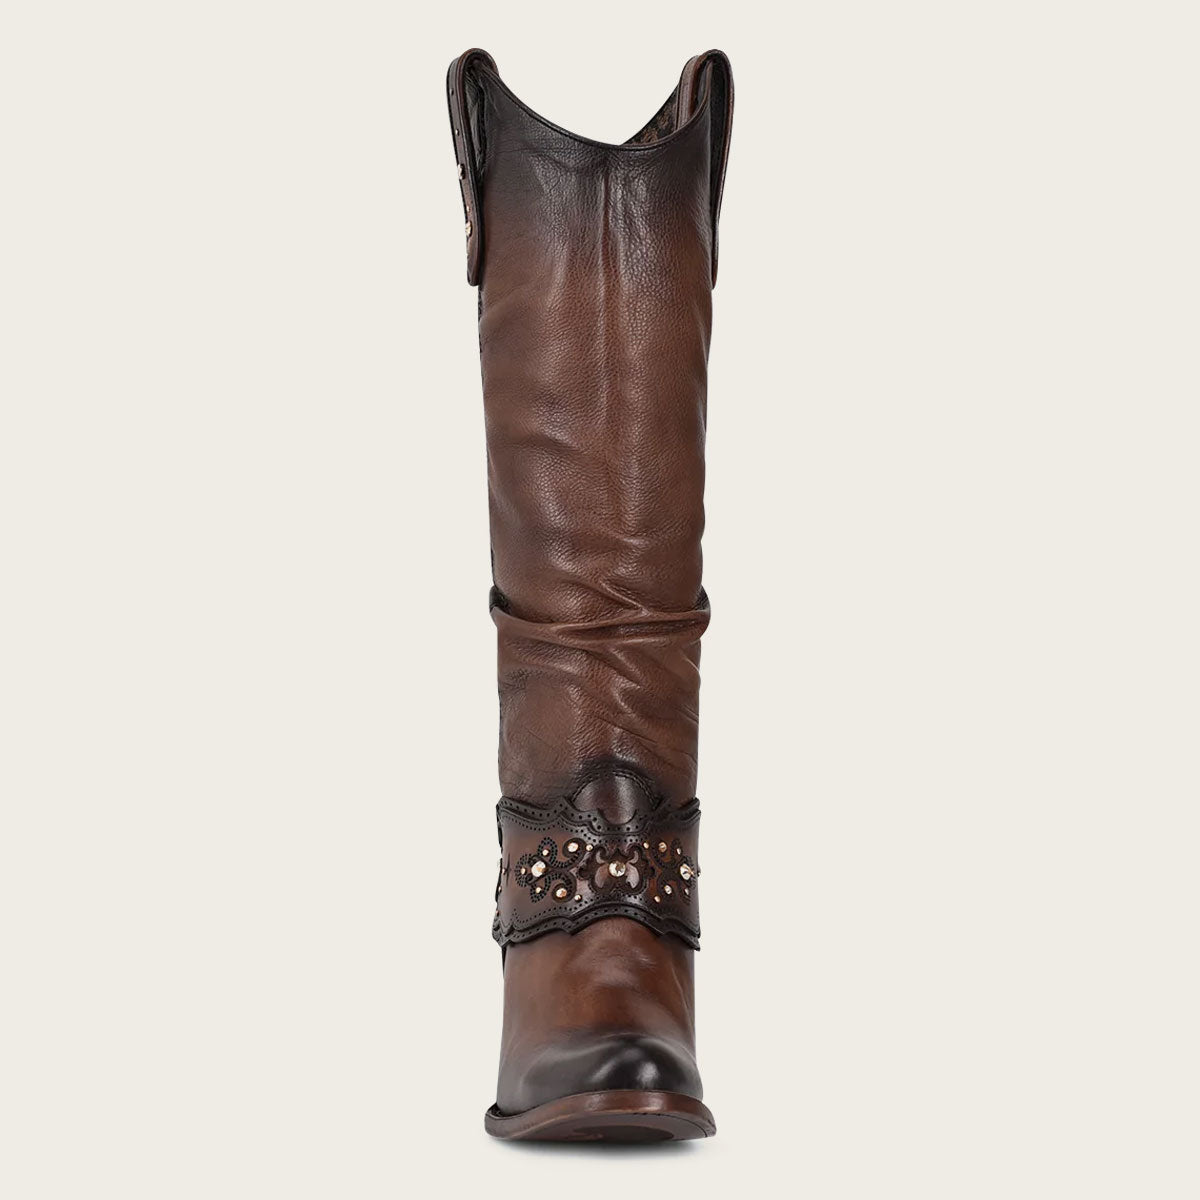 Brown leather boots hand-painted with Austrian crystals for women.